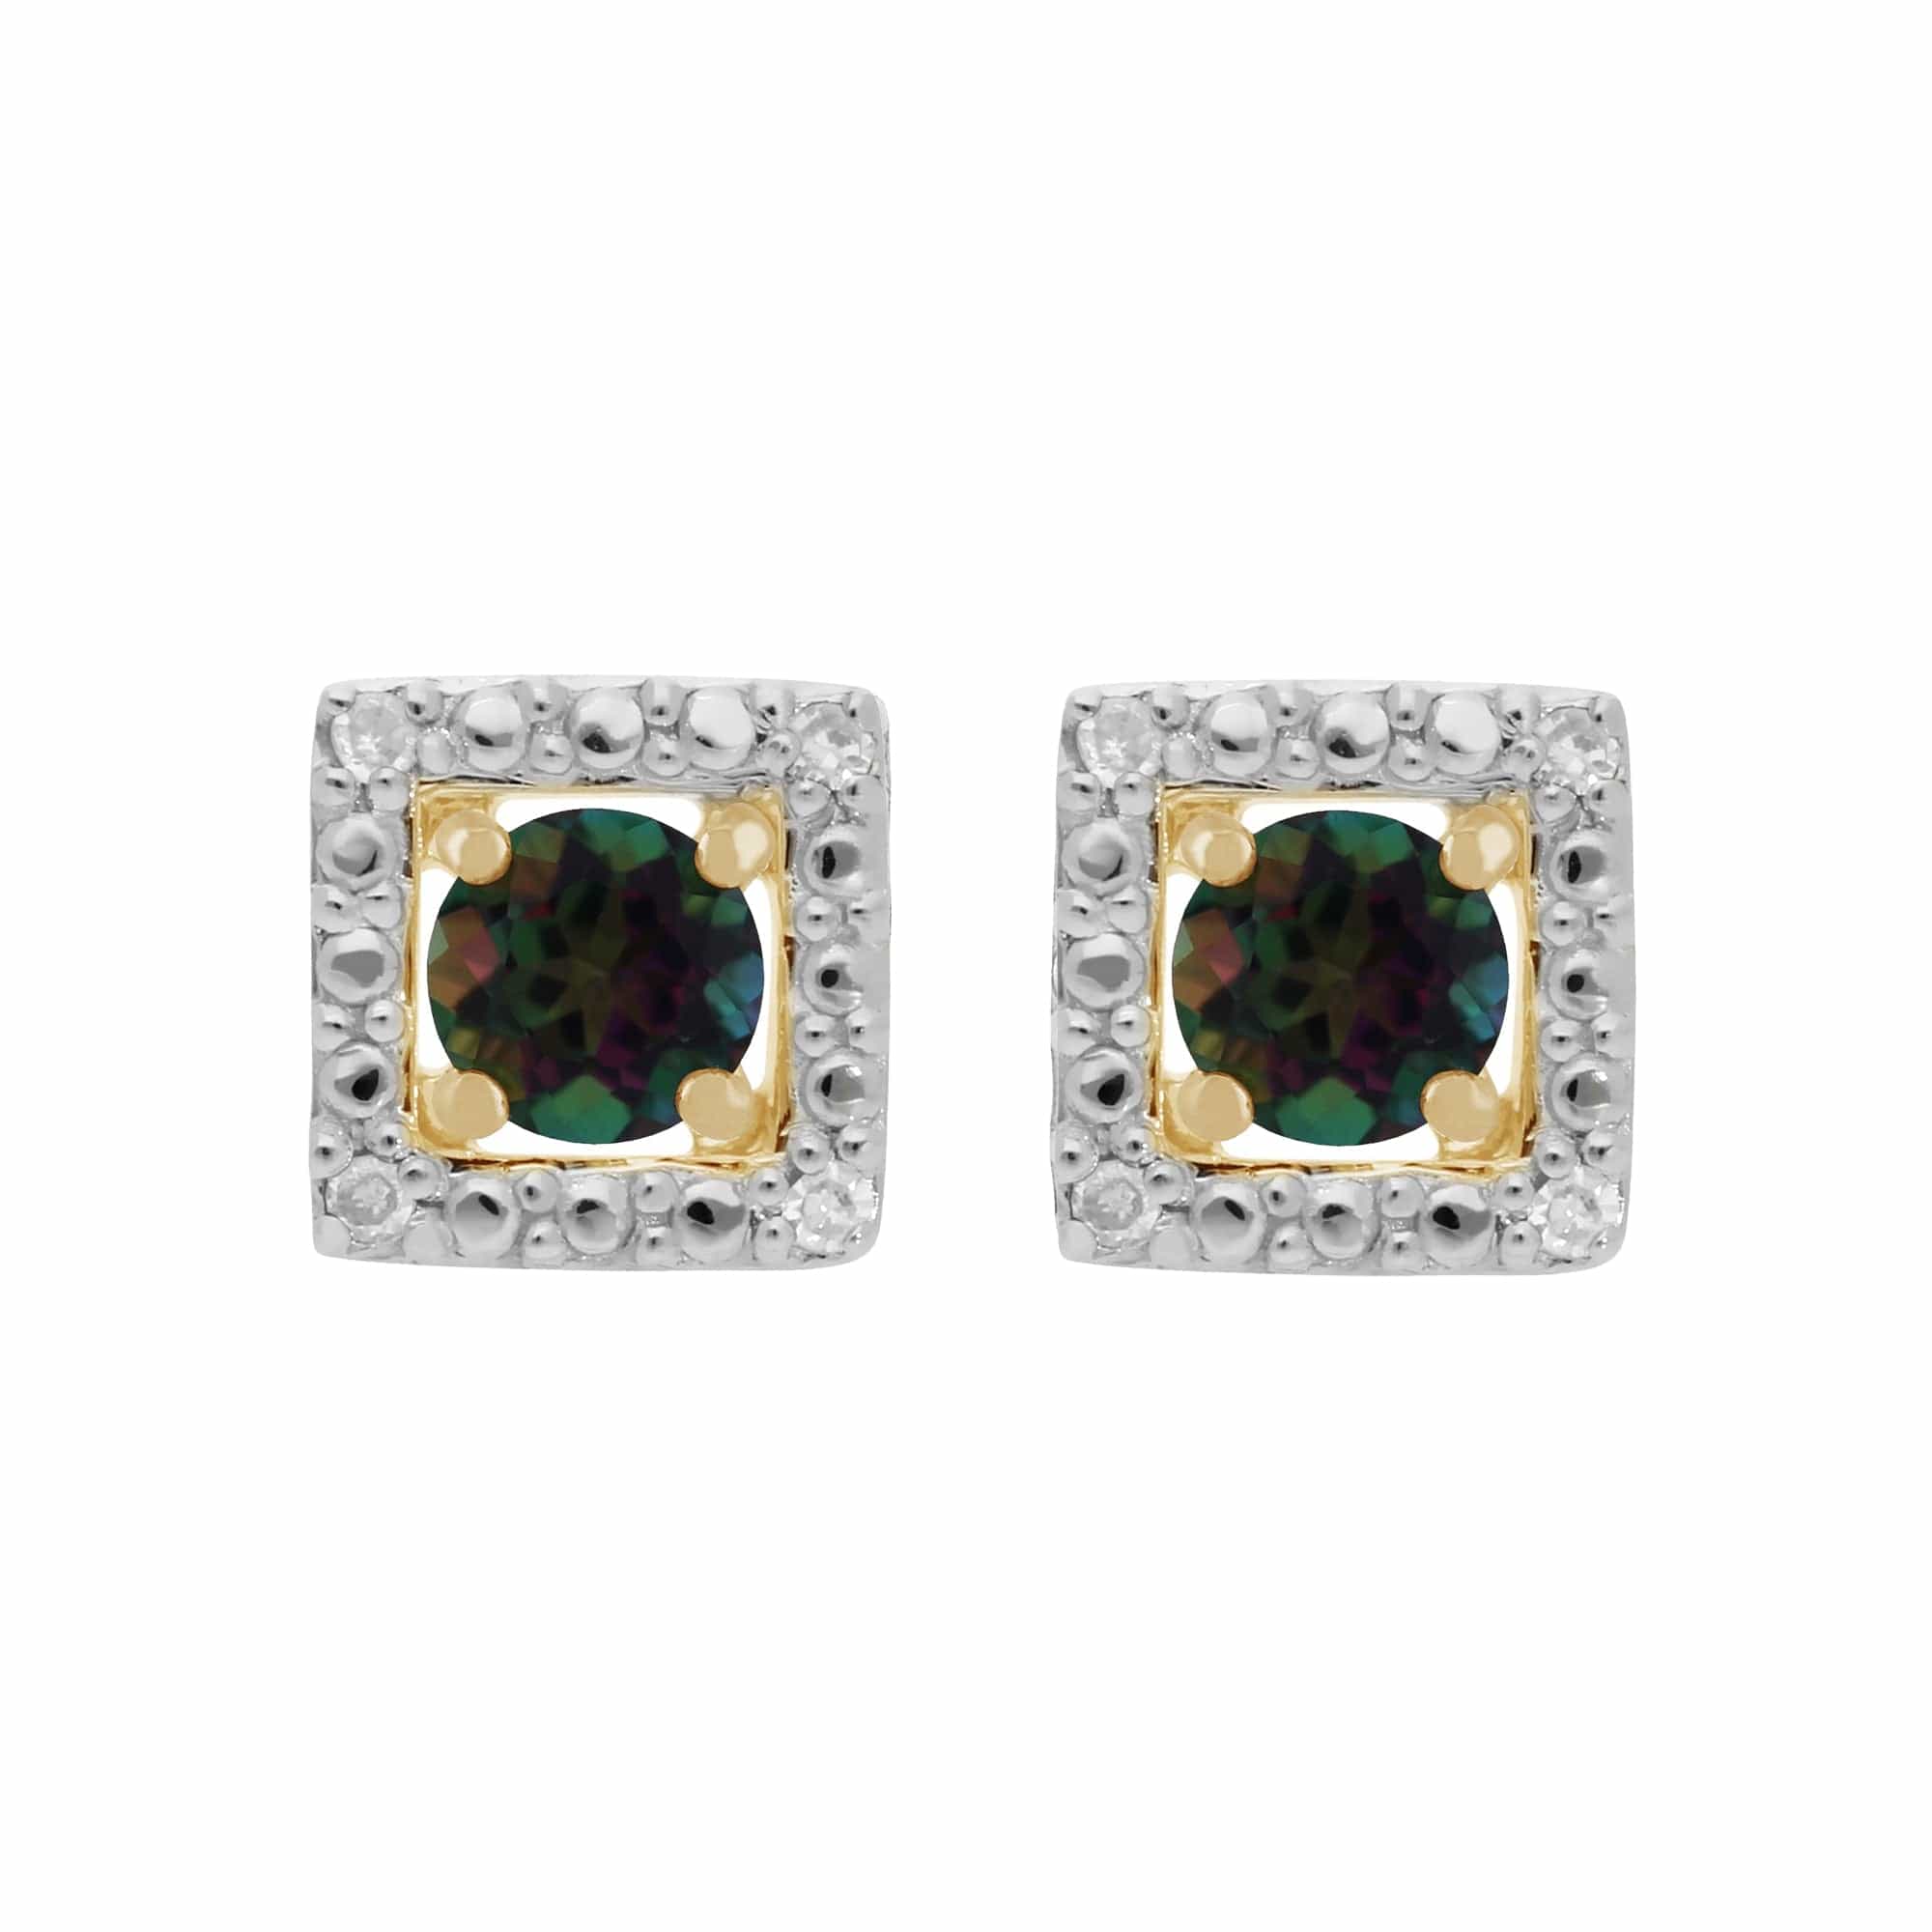 22523-191E0379019 Classic Round Mystic Topaz Stud Earrings with Detachable Diamond Square Earrings Jacket Set in 9ct Yellow Gold 1